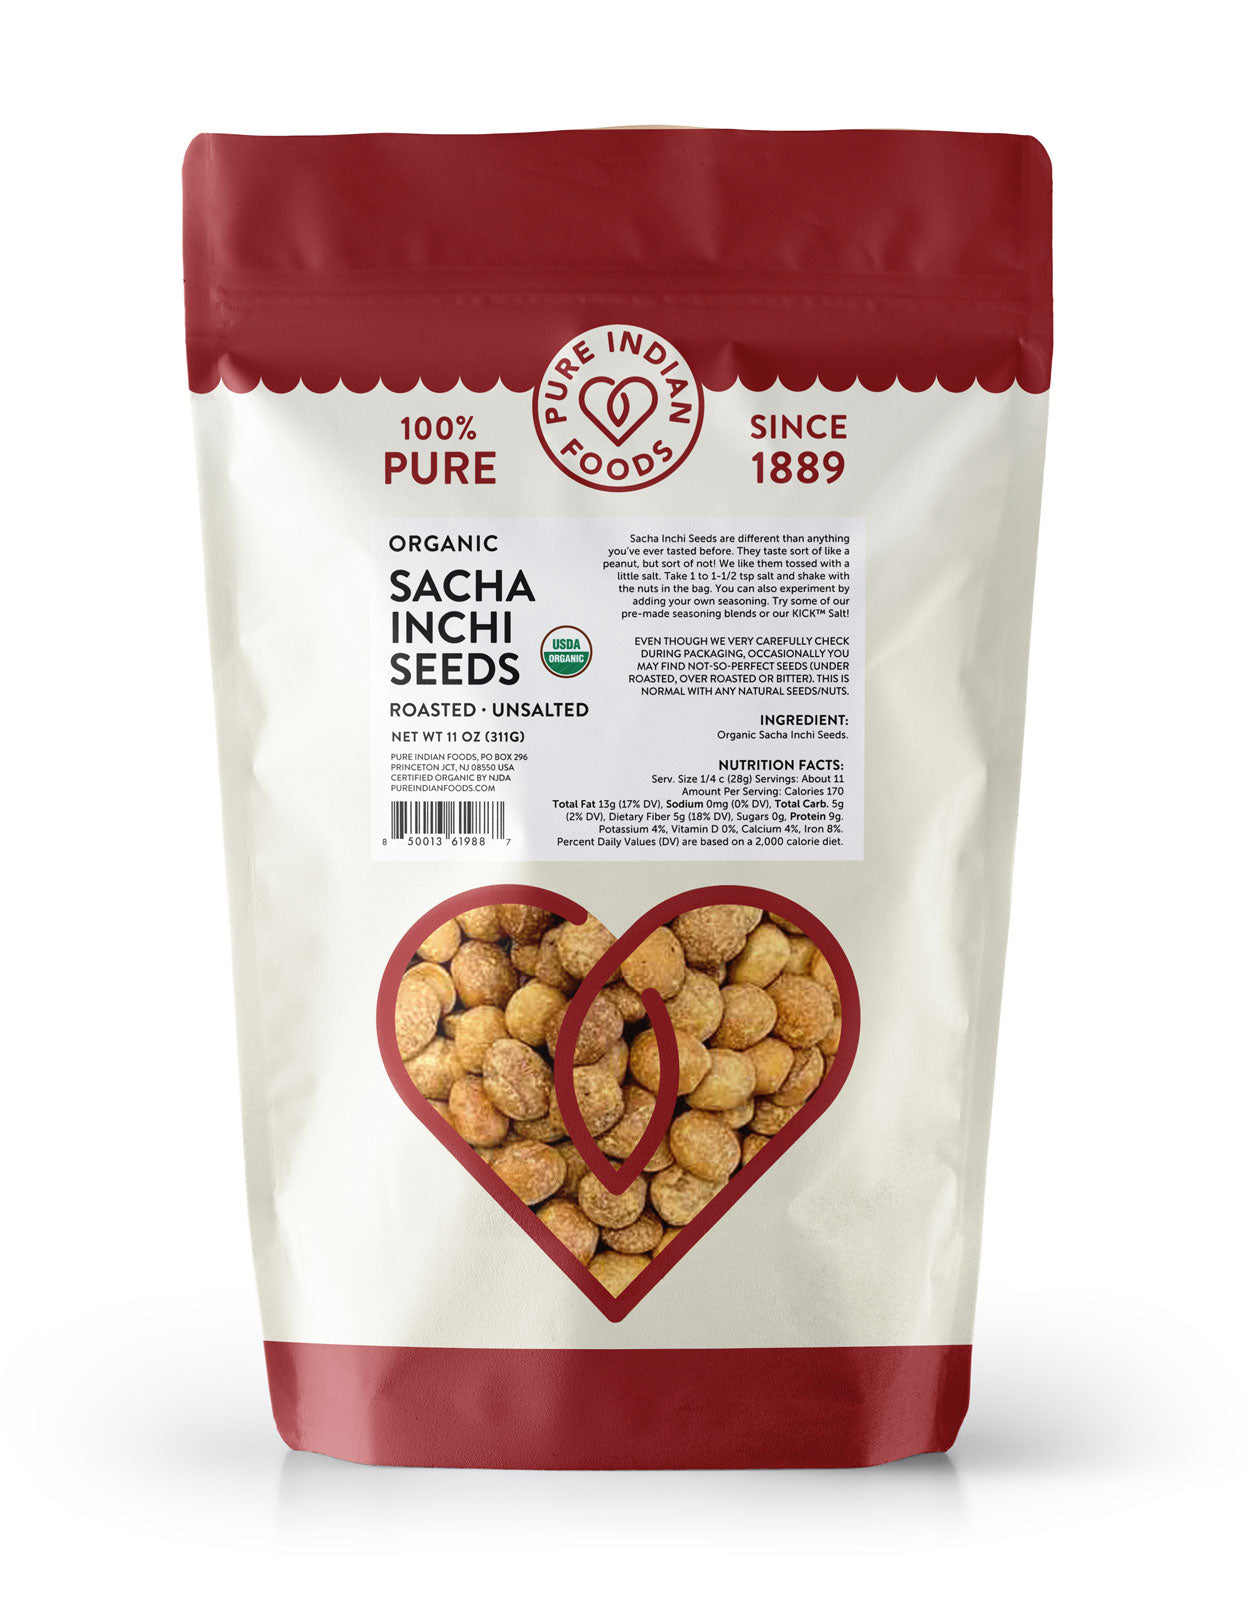 1 bag of Pure Indian Foods Organic Sacha Inchi Seeds, roasted and unsalted.